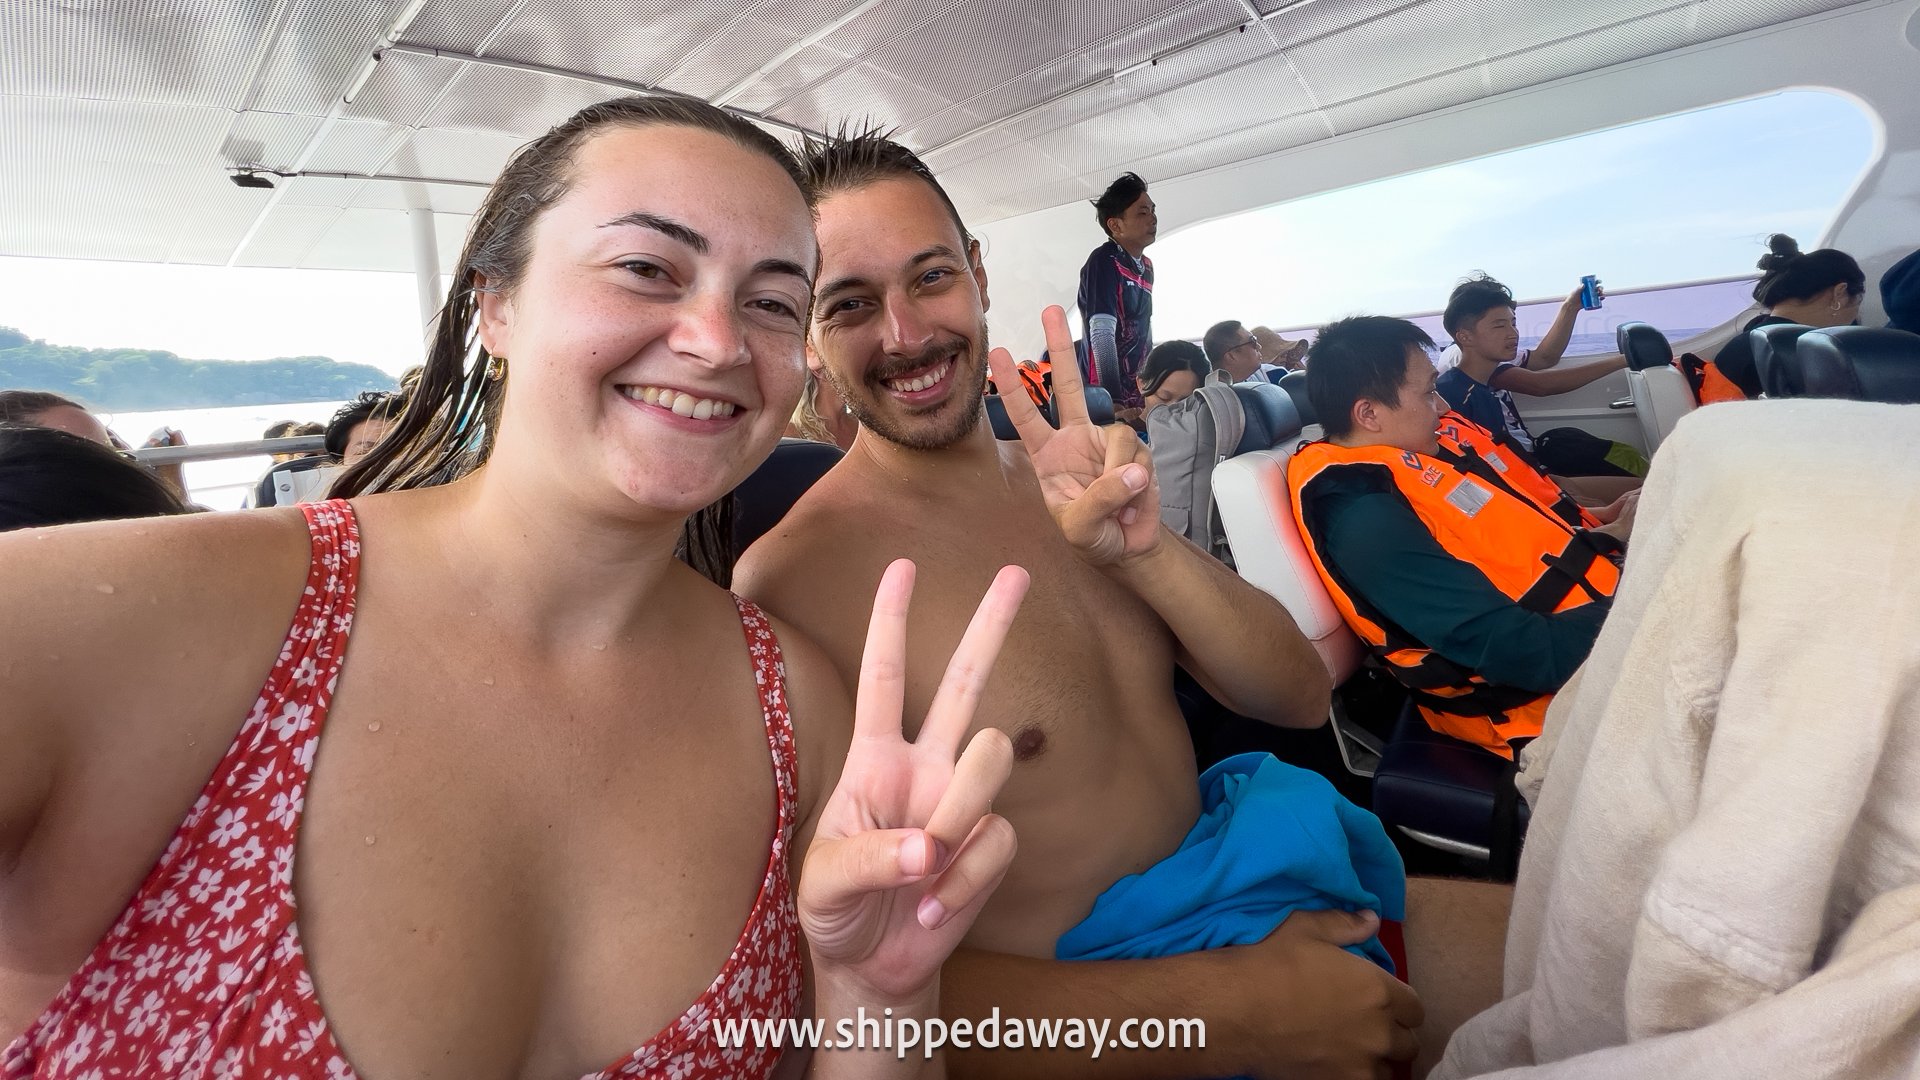 Arijana Tkalcec and Matej Span on the way back from Similan Islands day tour